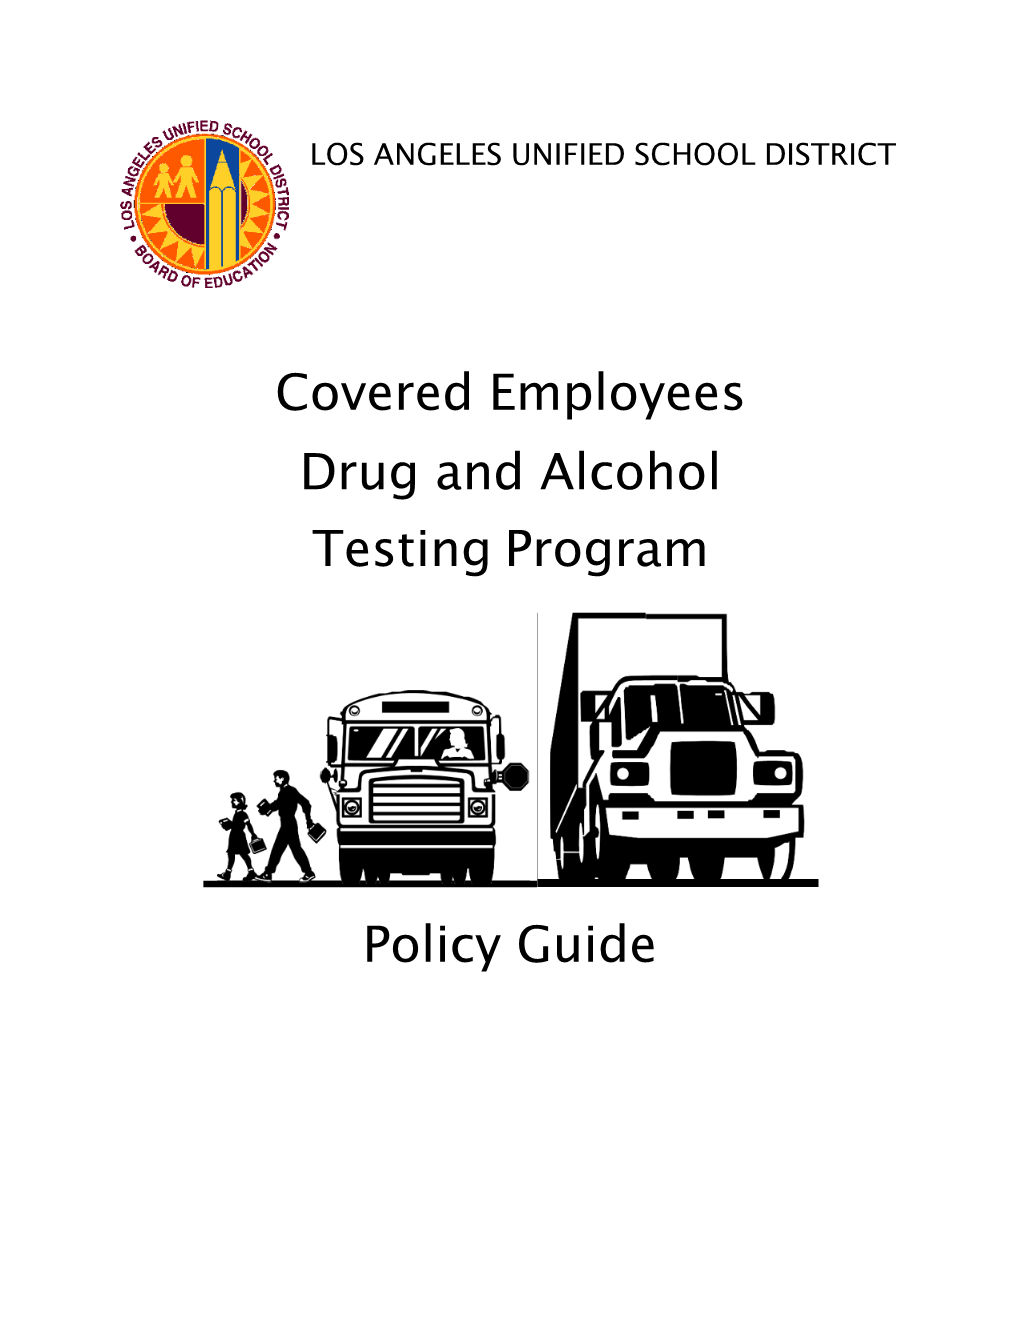 Covered Employees Drug and Alcohol Testing Program Policy Guide